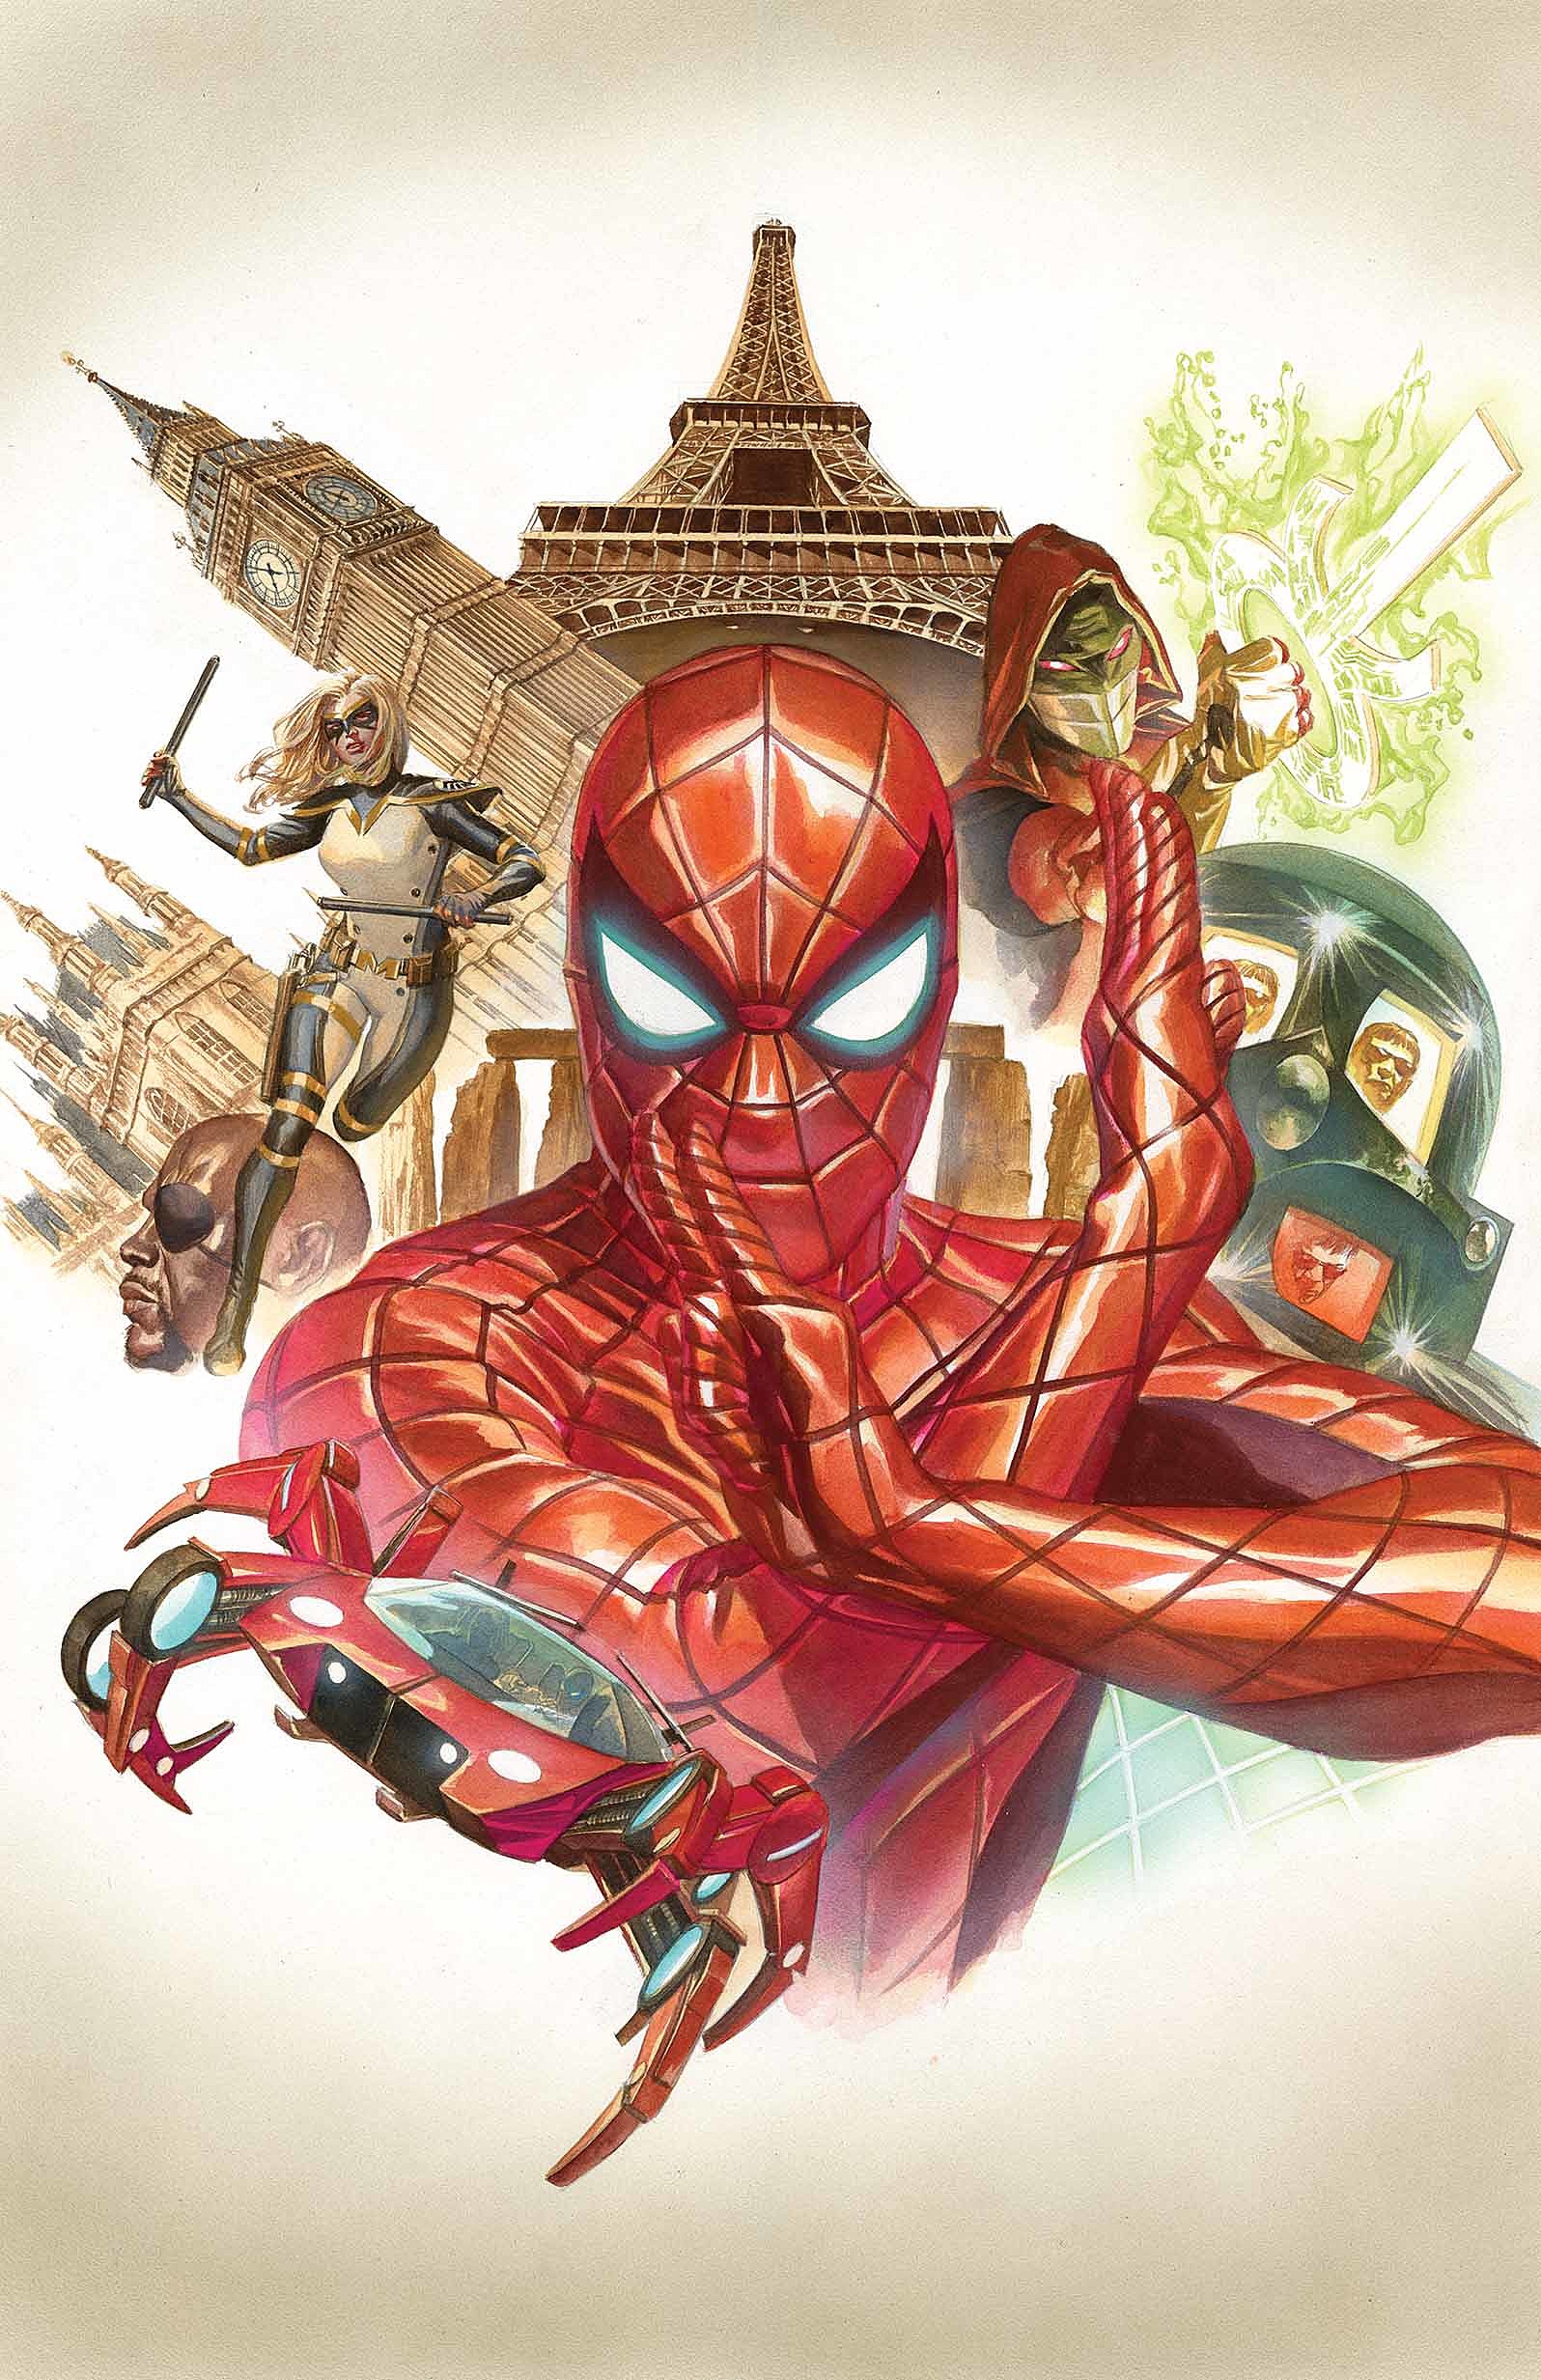 Cover by Alex ross